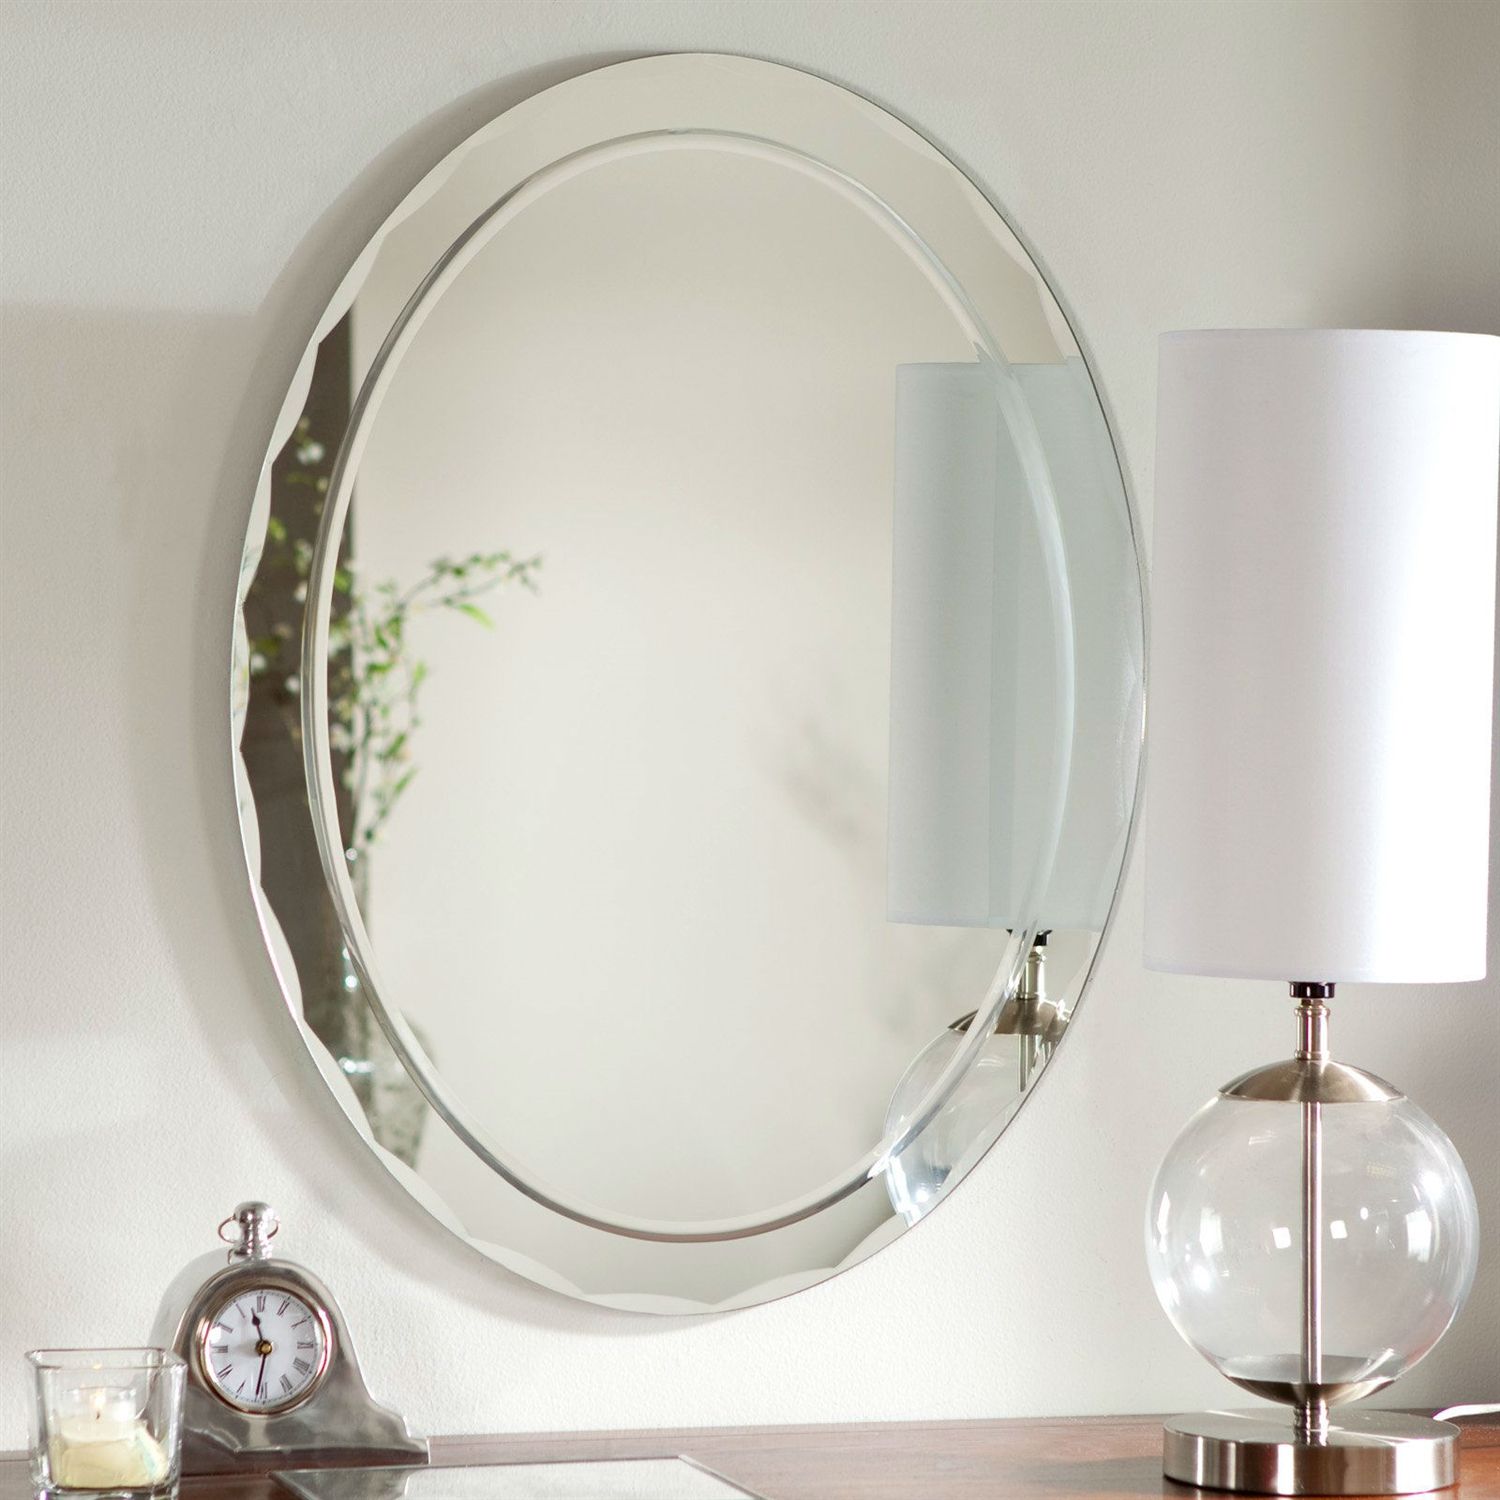 Oval Frameless Bathroom Vanity Wall Mirror With Beveled Edge Scallop Border Pertaining To Round Scalloped Edge Wall Mirrors (View 11 of 15)